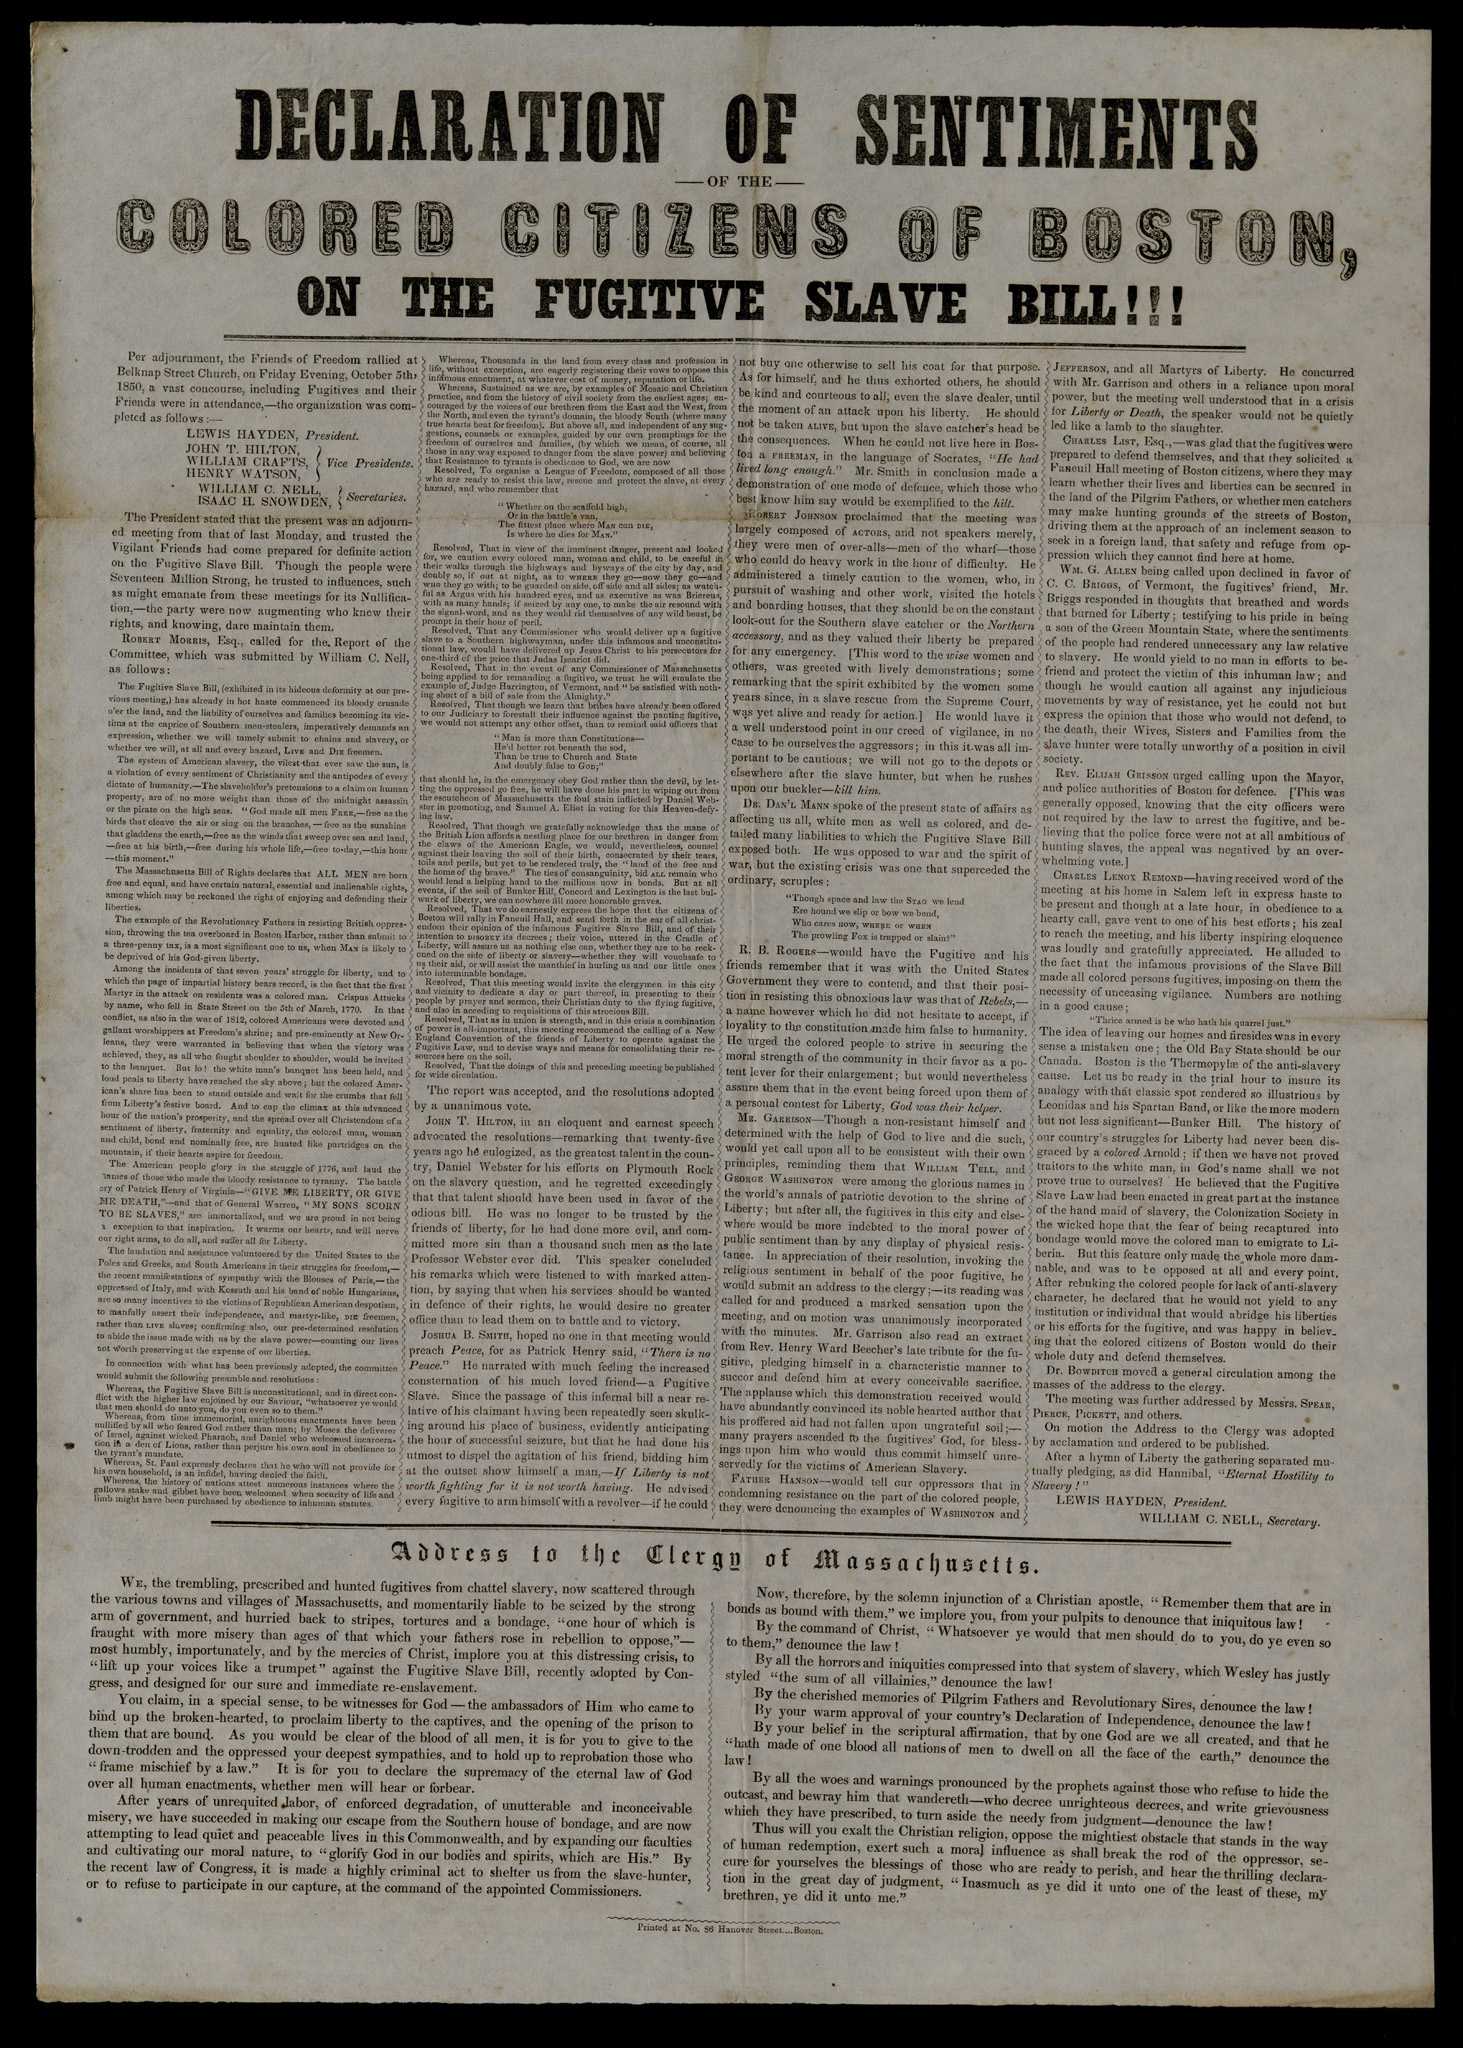 Newspaper with headline that reads "Declaration of sentiments of the Colored Citizens of Boston on the Fugitive Slave Bill"